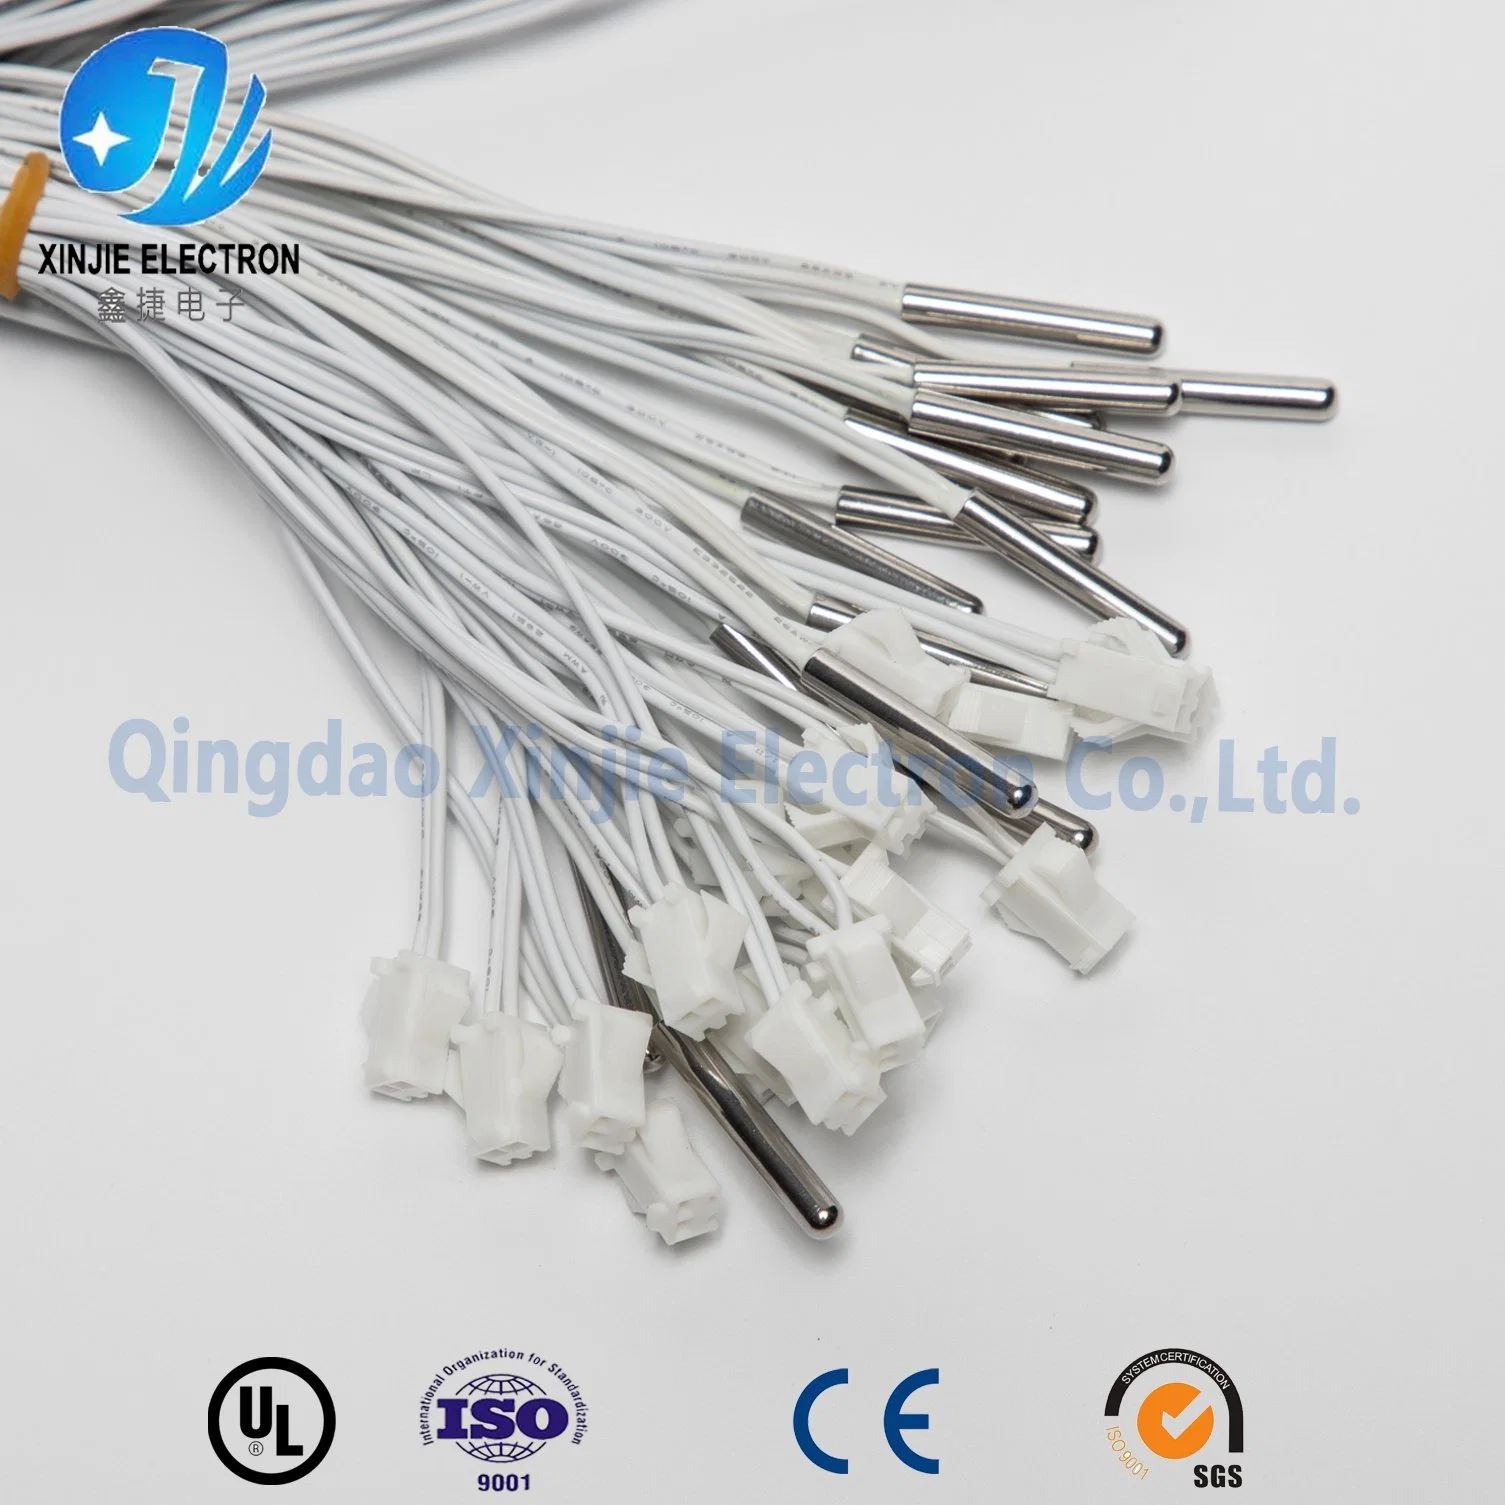 Customized ODM Wire Harness Cable Assembly